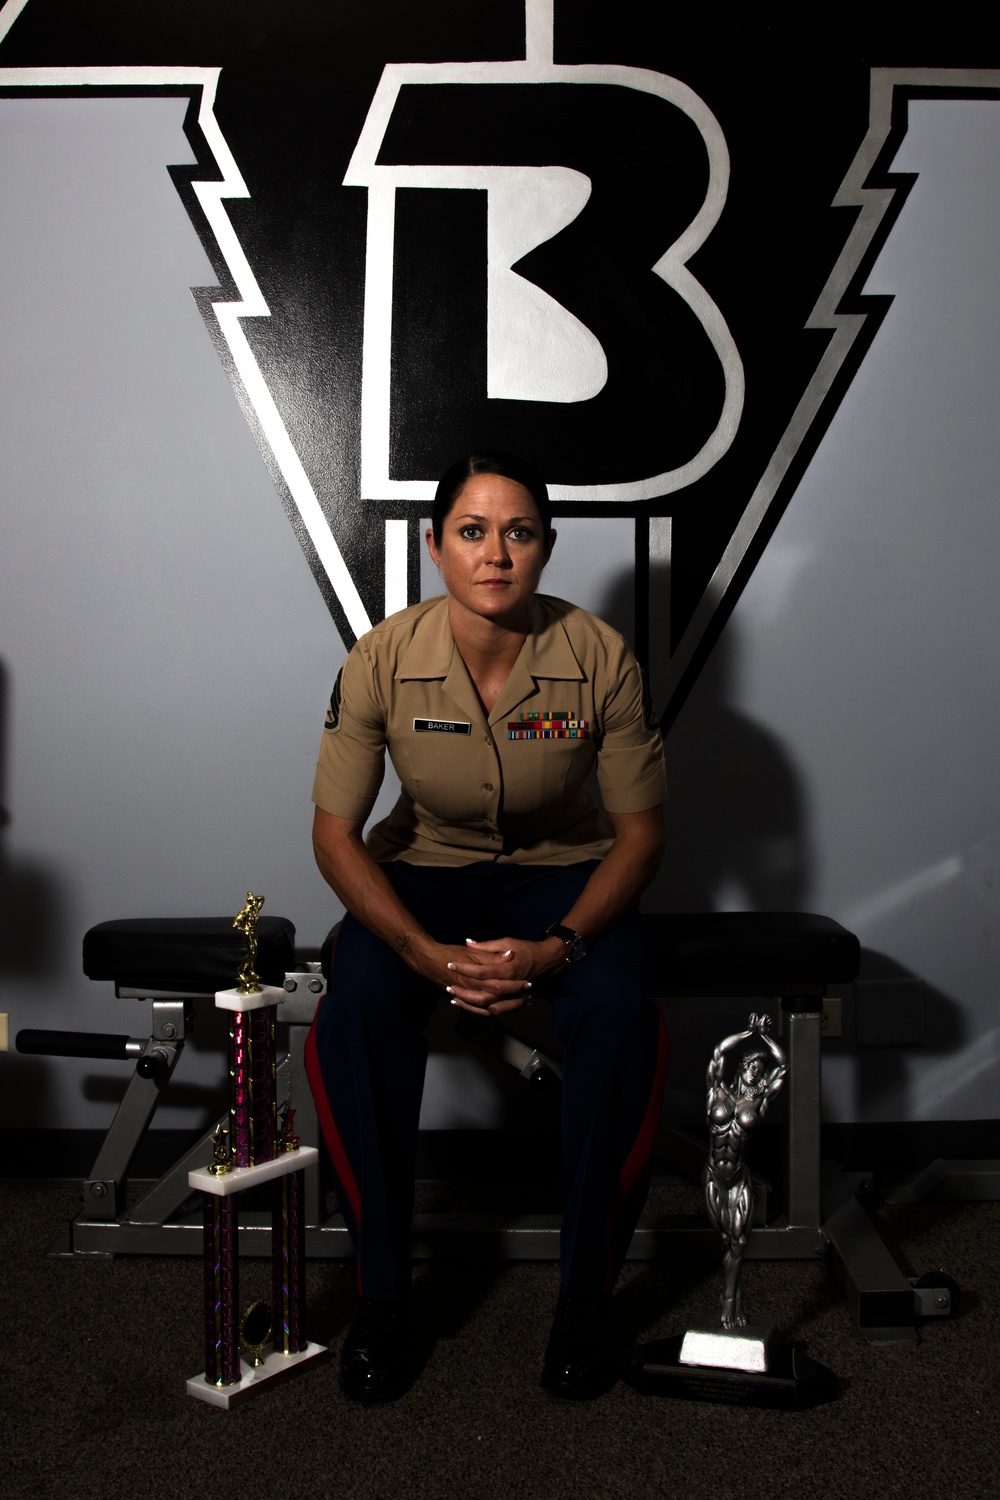 Do you even lift: Marine, Mom makes gains, wins local competition